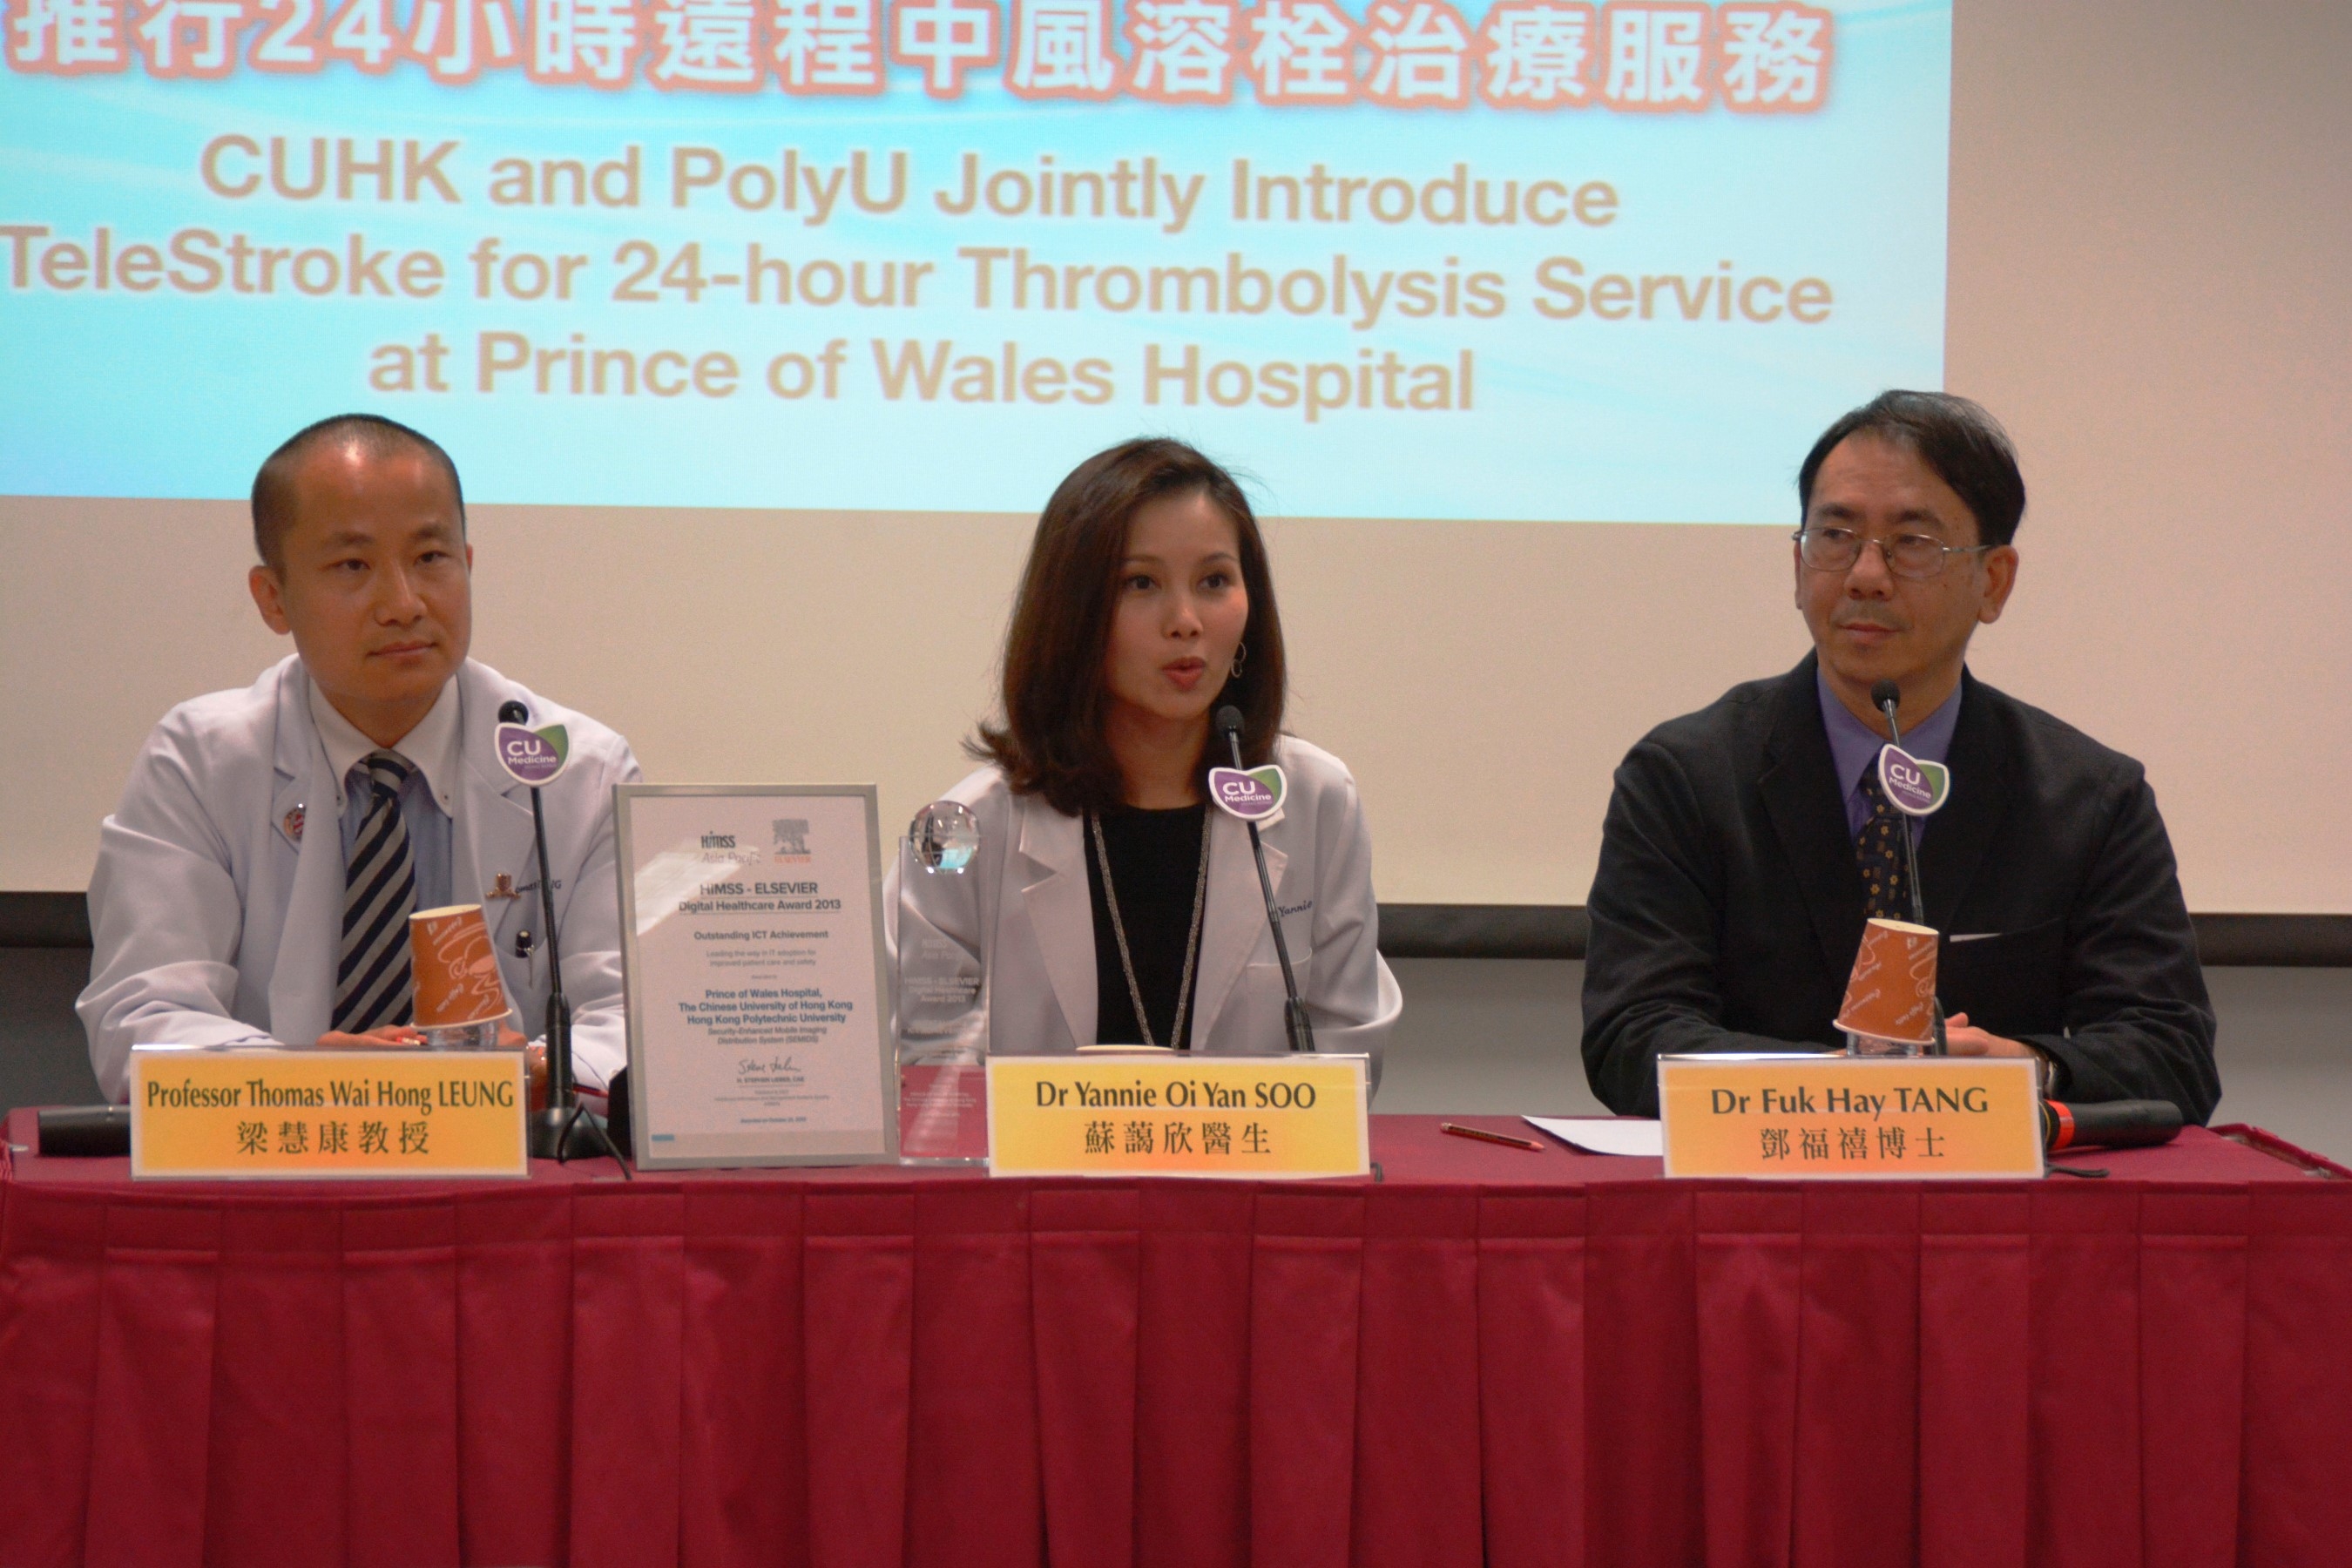 (From left) Dr. Thomas Leung, Associate Professor, Division of Neurology, Department of Medicine and Therapeutics, CUHK; Dr. Yannie Soo, Neurologist, Associate Consultant, Department of Medicine and Therapeutics, Prince of Wales Hospital and Dr. Fuk Hay Tang, Associate Professor & Associate Head, Department of Health Technology and Informatics, PolyU present the latest telestroke system using SEMIDS to facilitate neurologist’s distant assessment for thrombolysis during non-working hours.